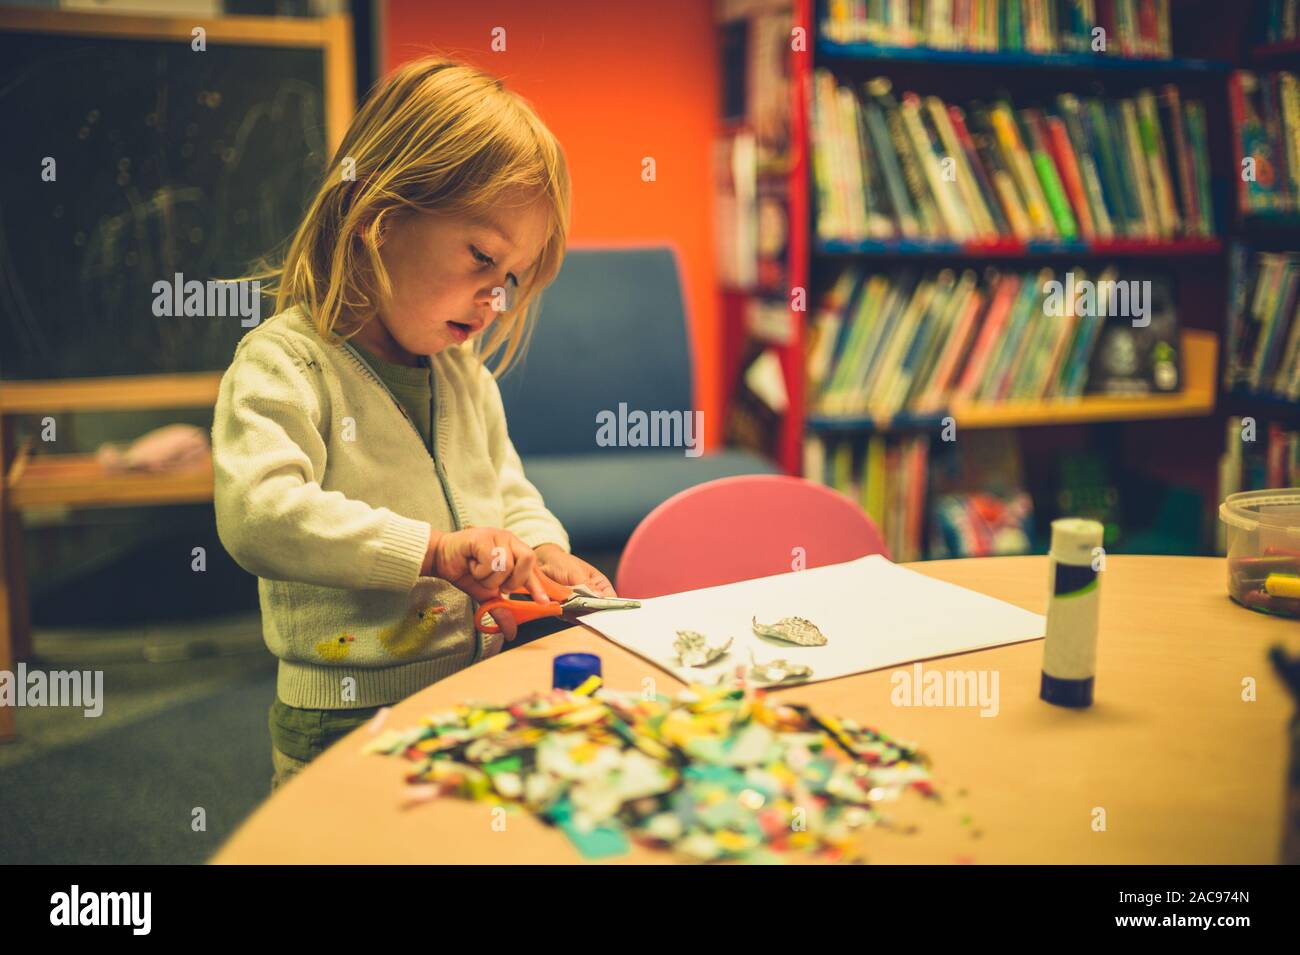 A little toddler is doing arts and crafts with scissors and glue at school Stock Photo